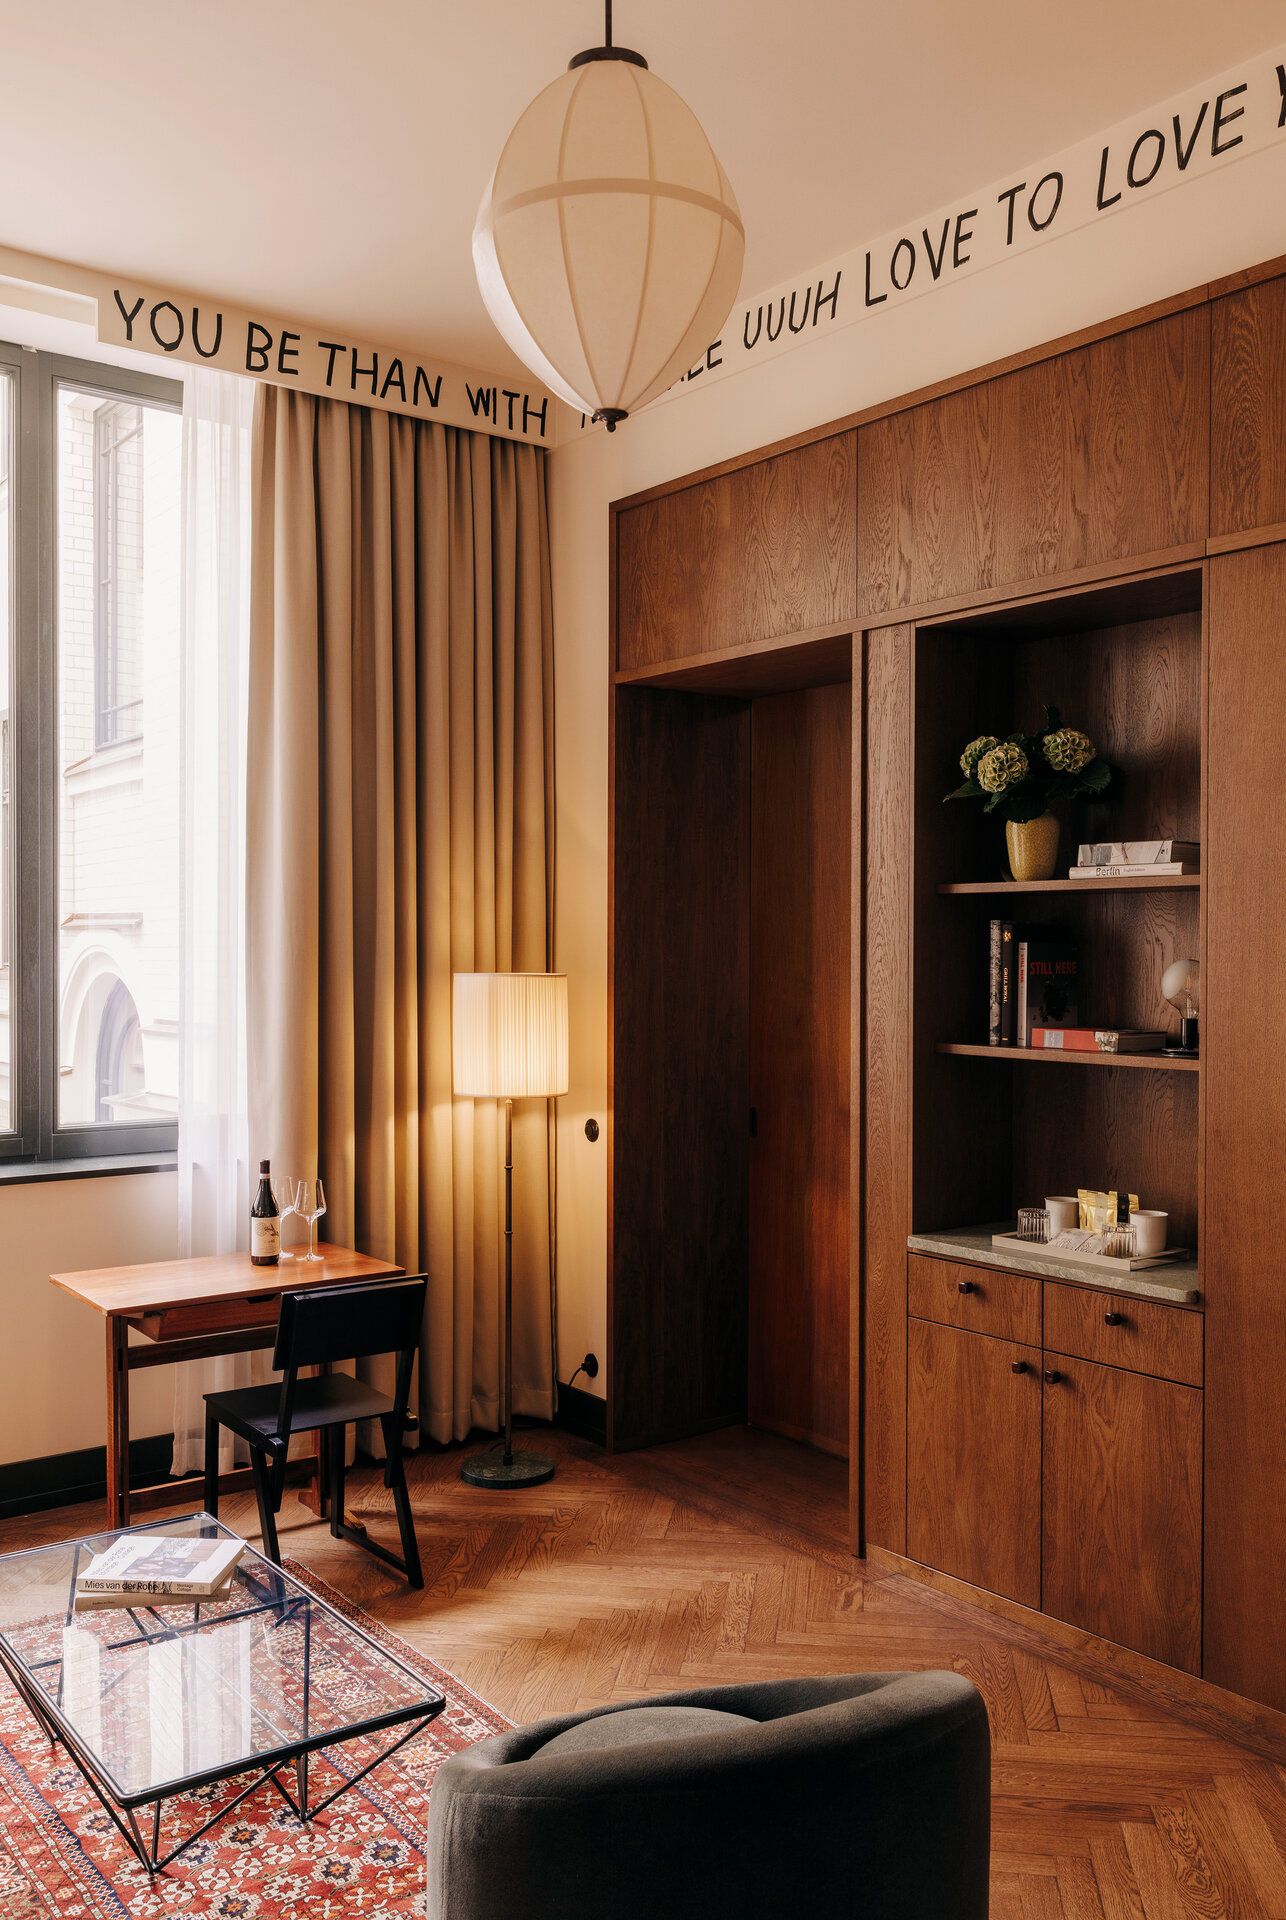 Living area of a hotel room in the boutique hotel Château Royal Berlin equipped with small desk in front of a large window, a cosy seating area and a large wall unit in dark wood tones